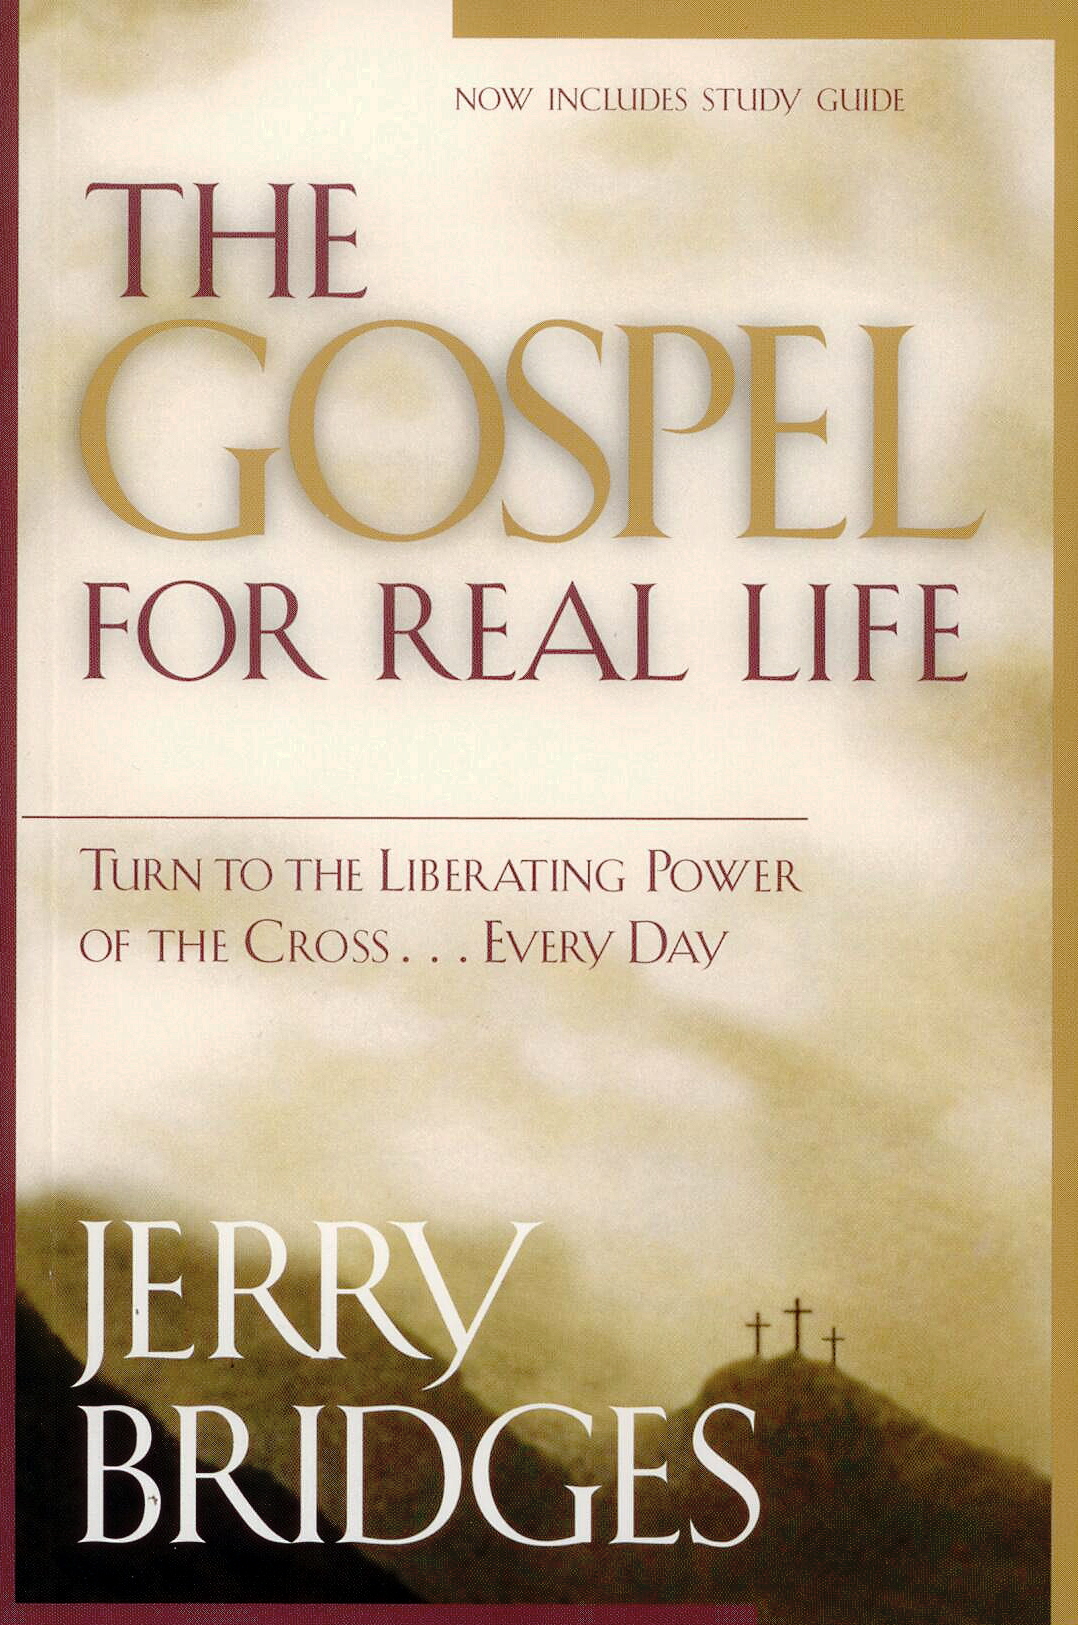 The Gospel For Real Life by Jerry Bridges